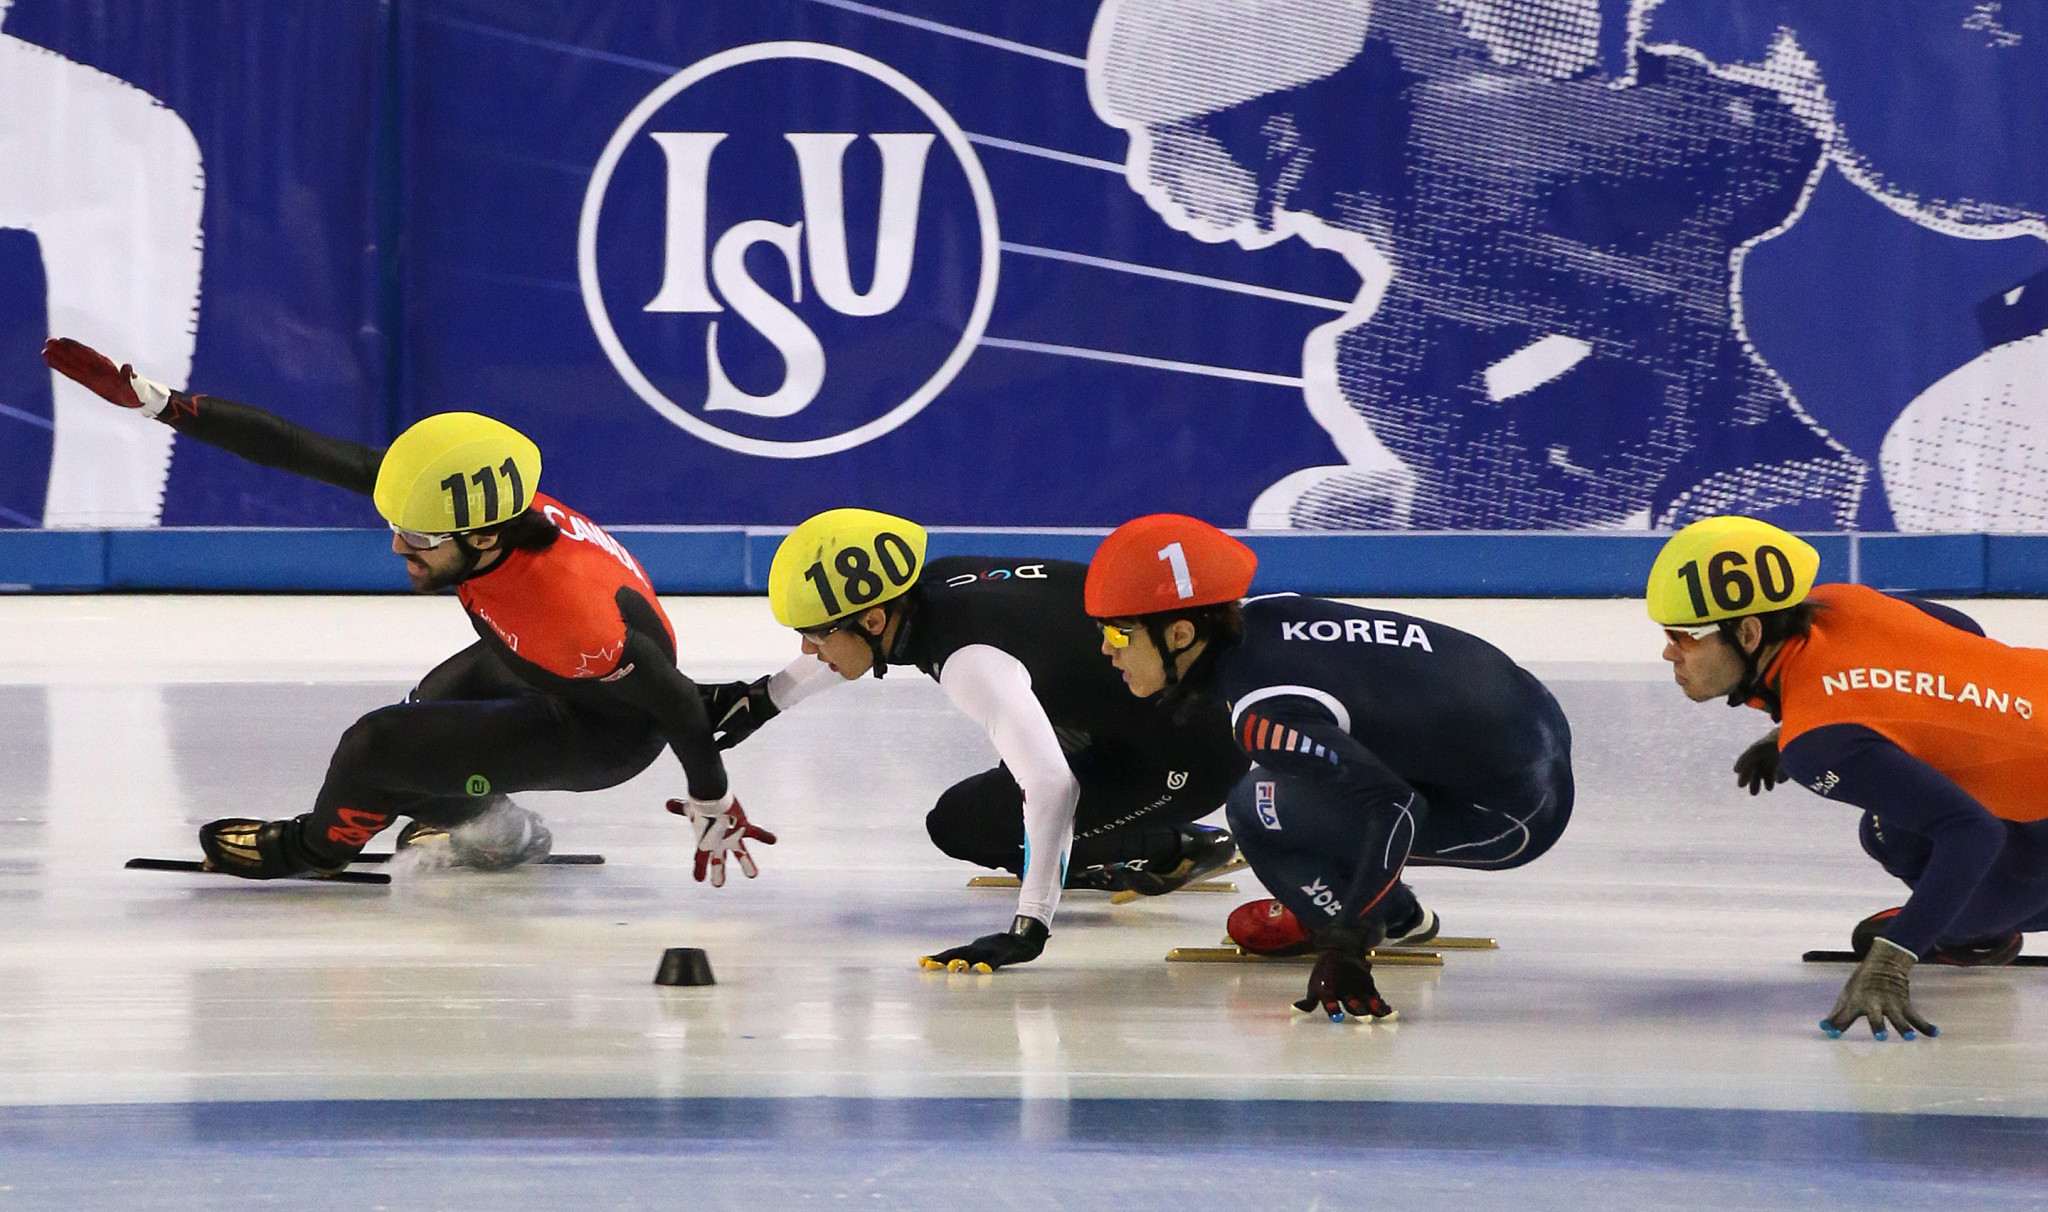 Debrecen also staged the 2013 World Short Track Championships ©Getty Images